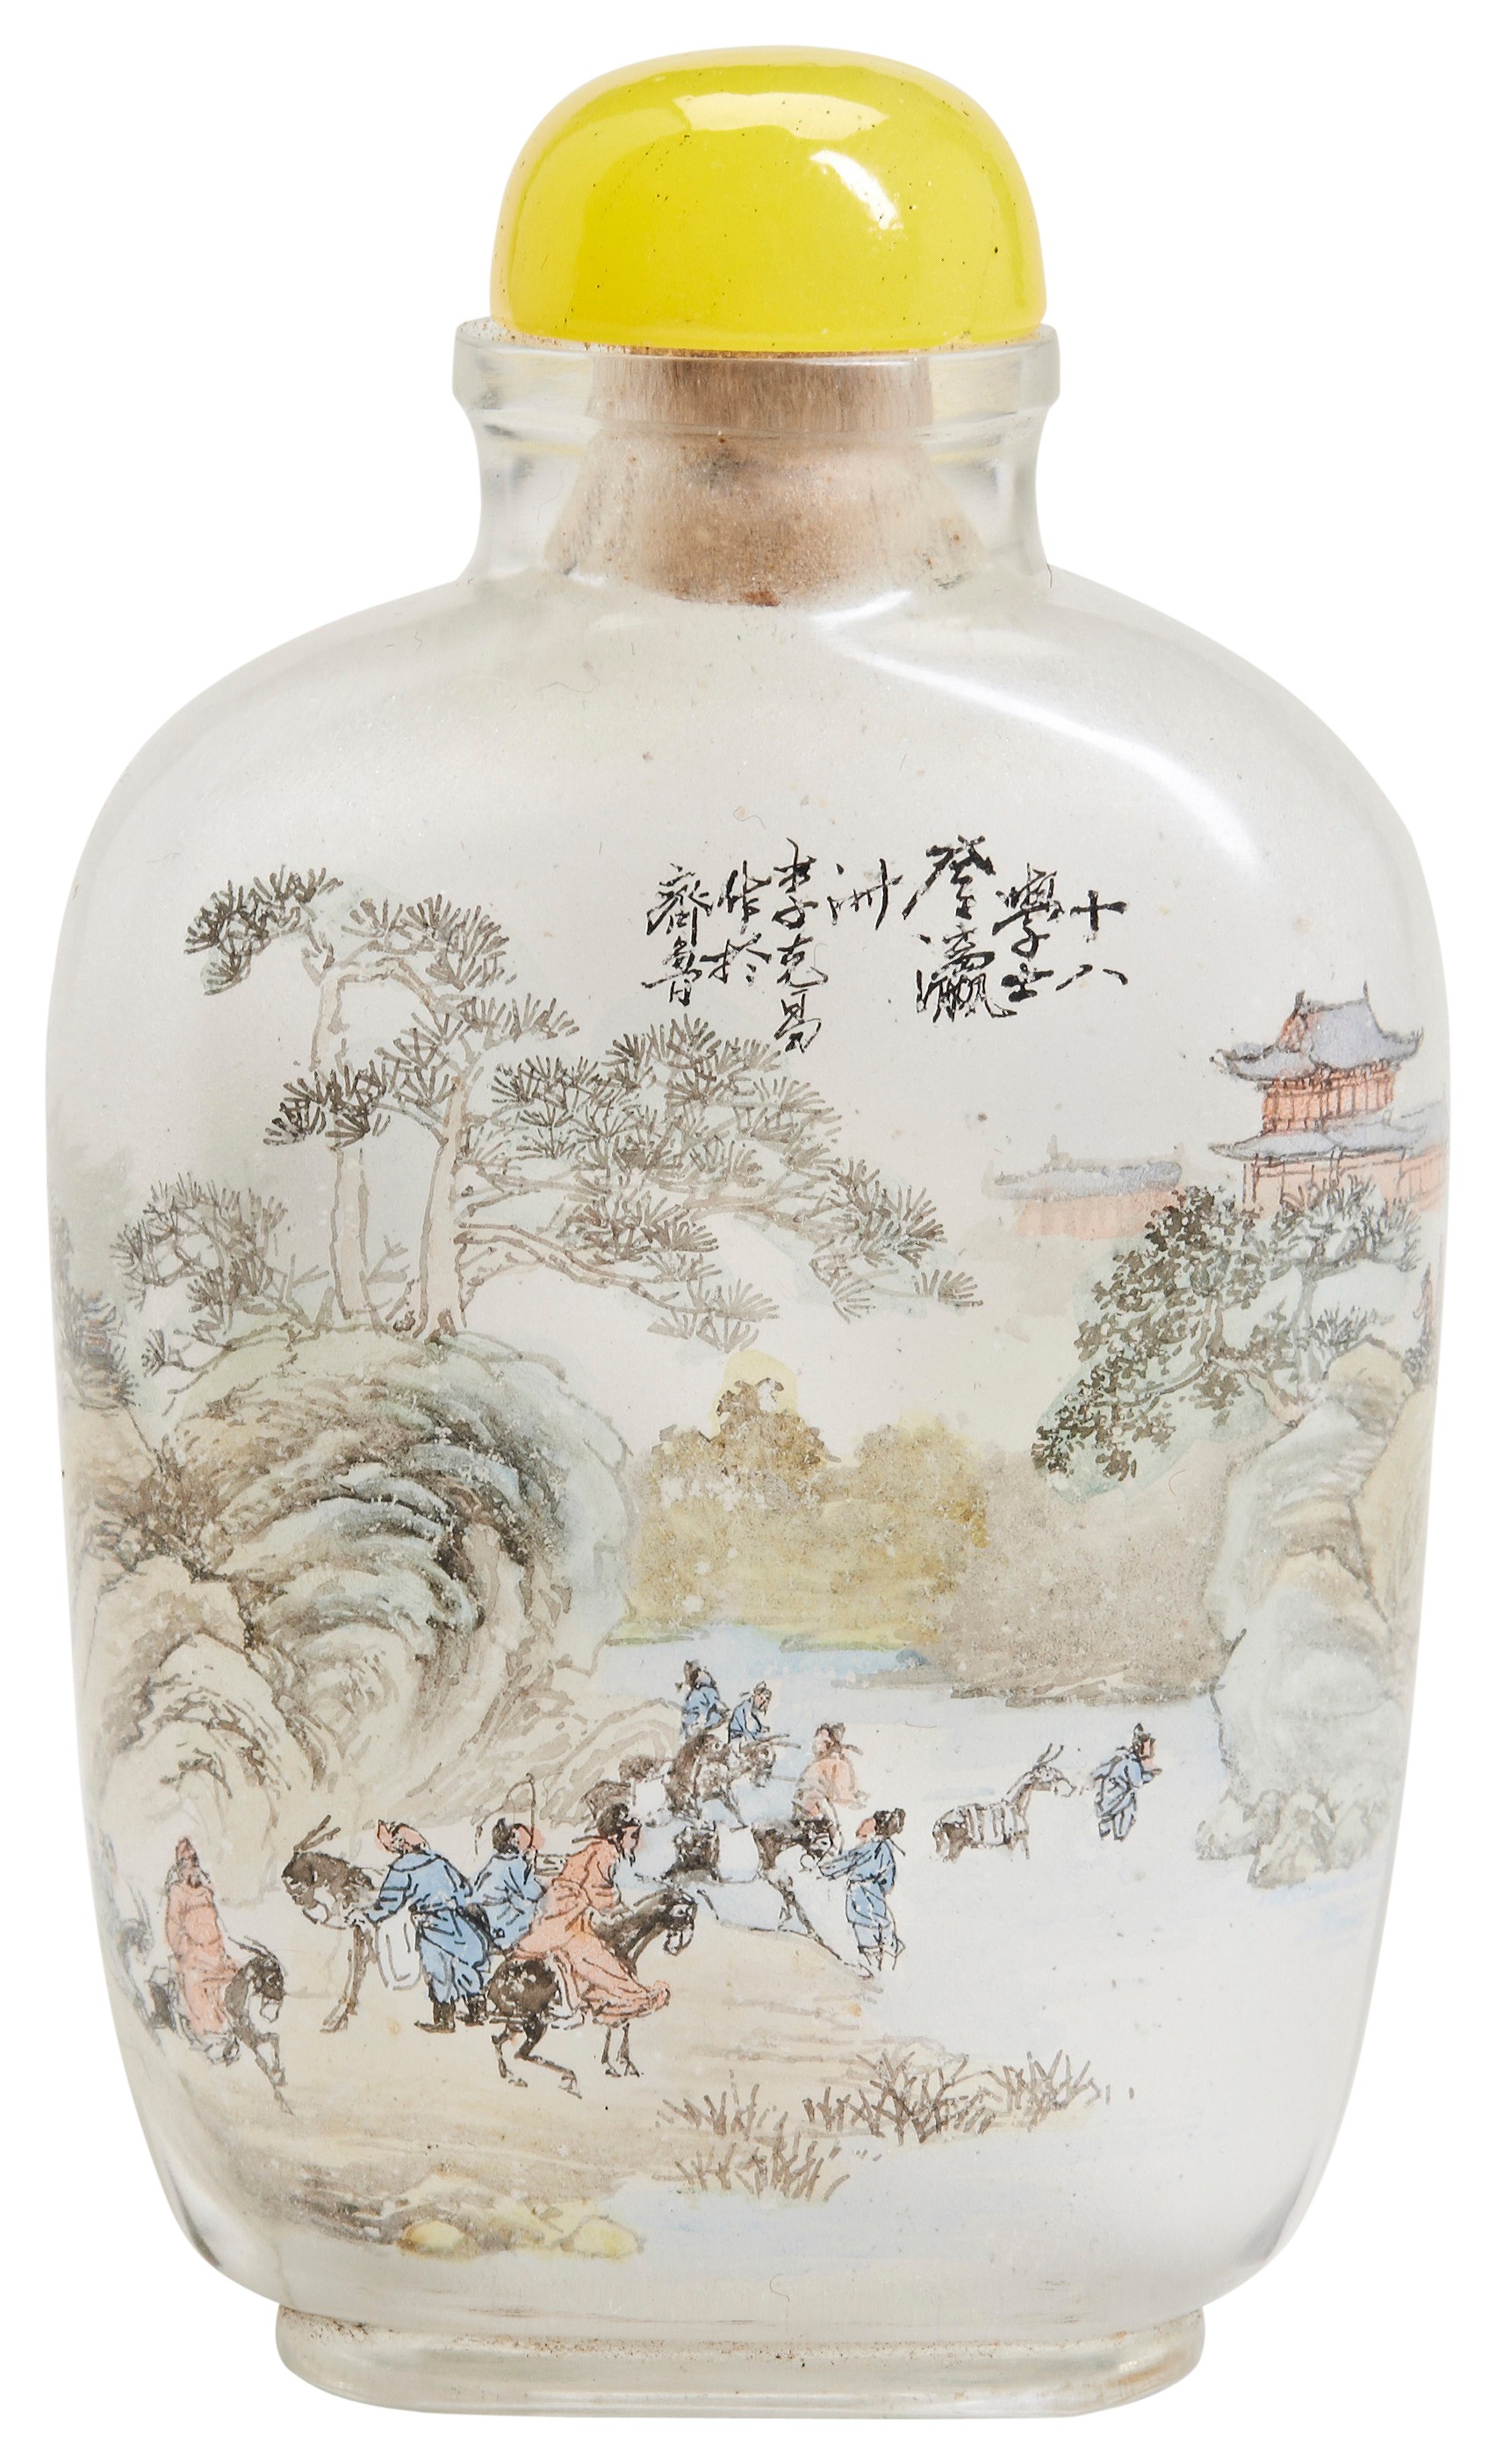 A PEKING GLASS SNUFF BOTTLE WITH A STOPPER  20TH CENTURY  depict a scene of eighteen scholars